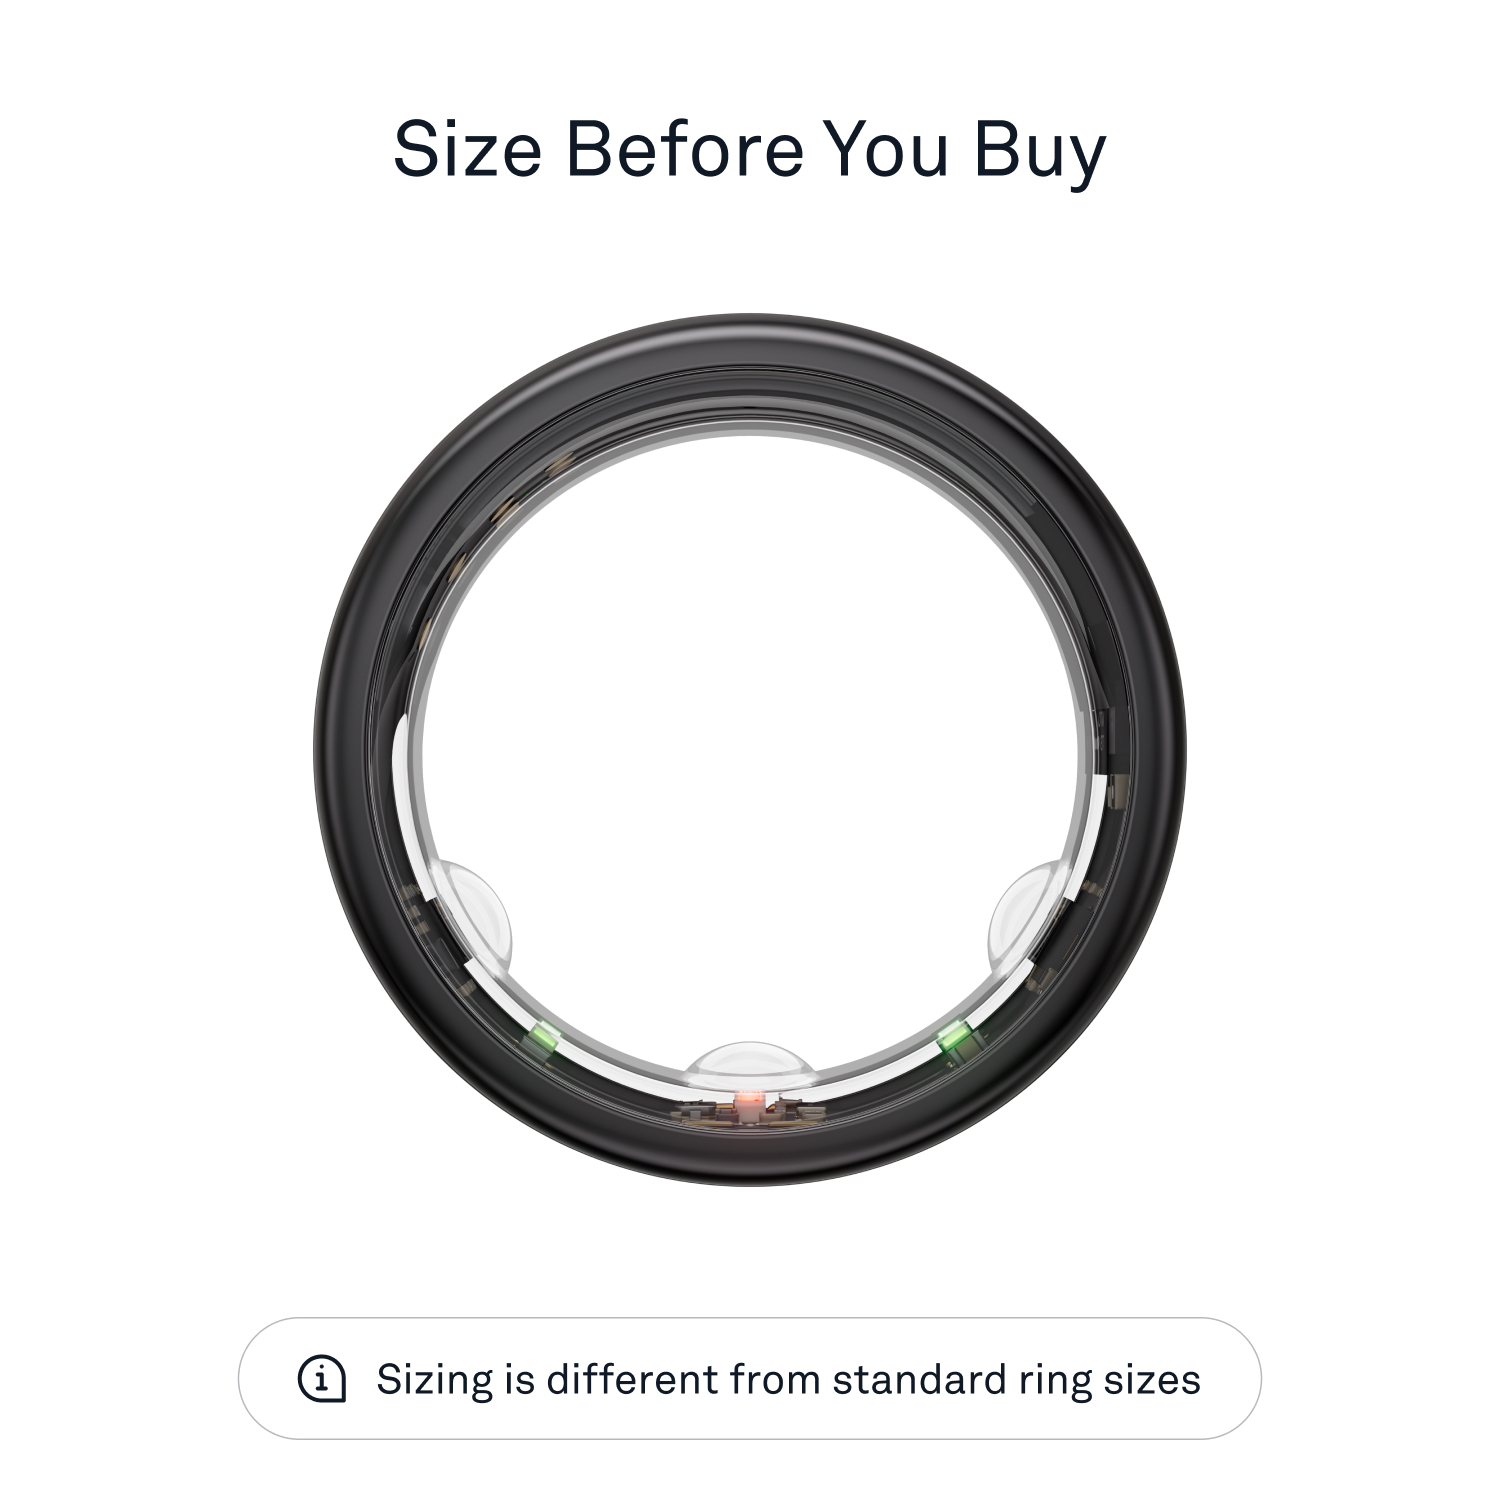 Oura Ring Gen3 Horizon Size Before You Buy Size 13 Black JZ90 